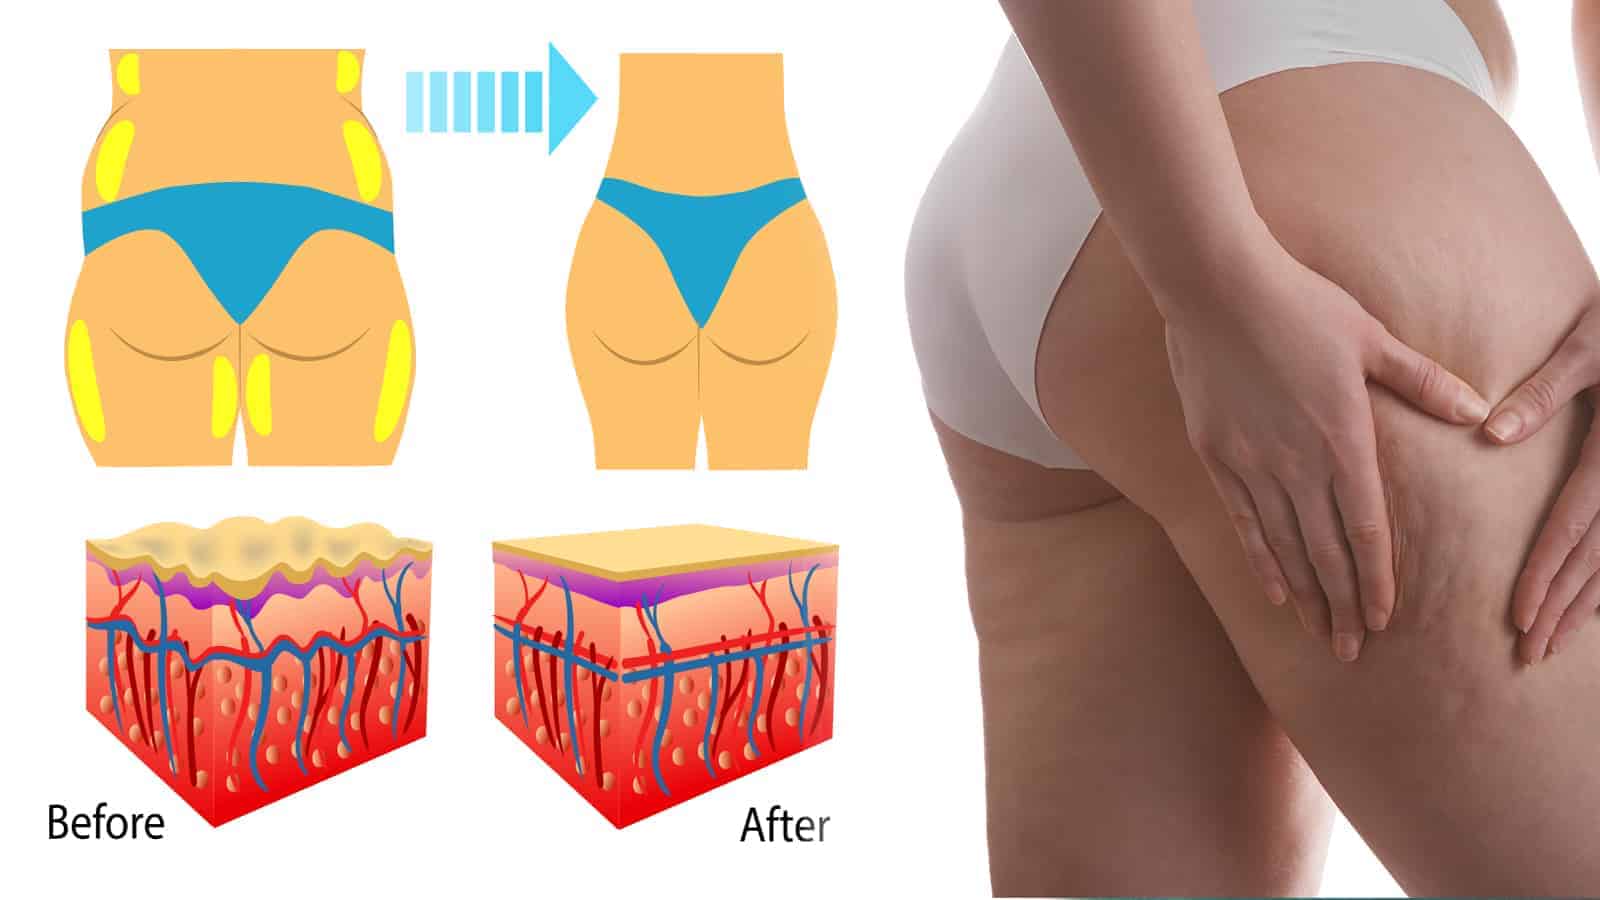 15 Science-Backed Tips to Reduce Cellulite